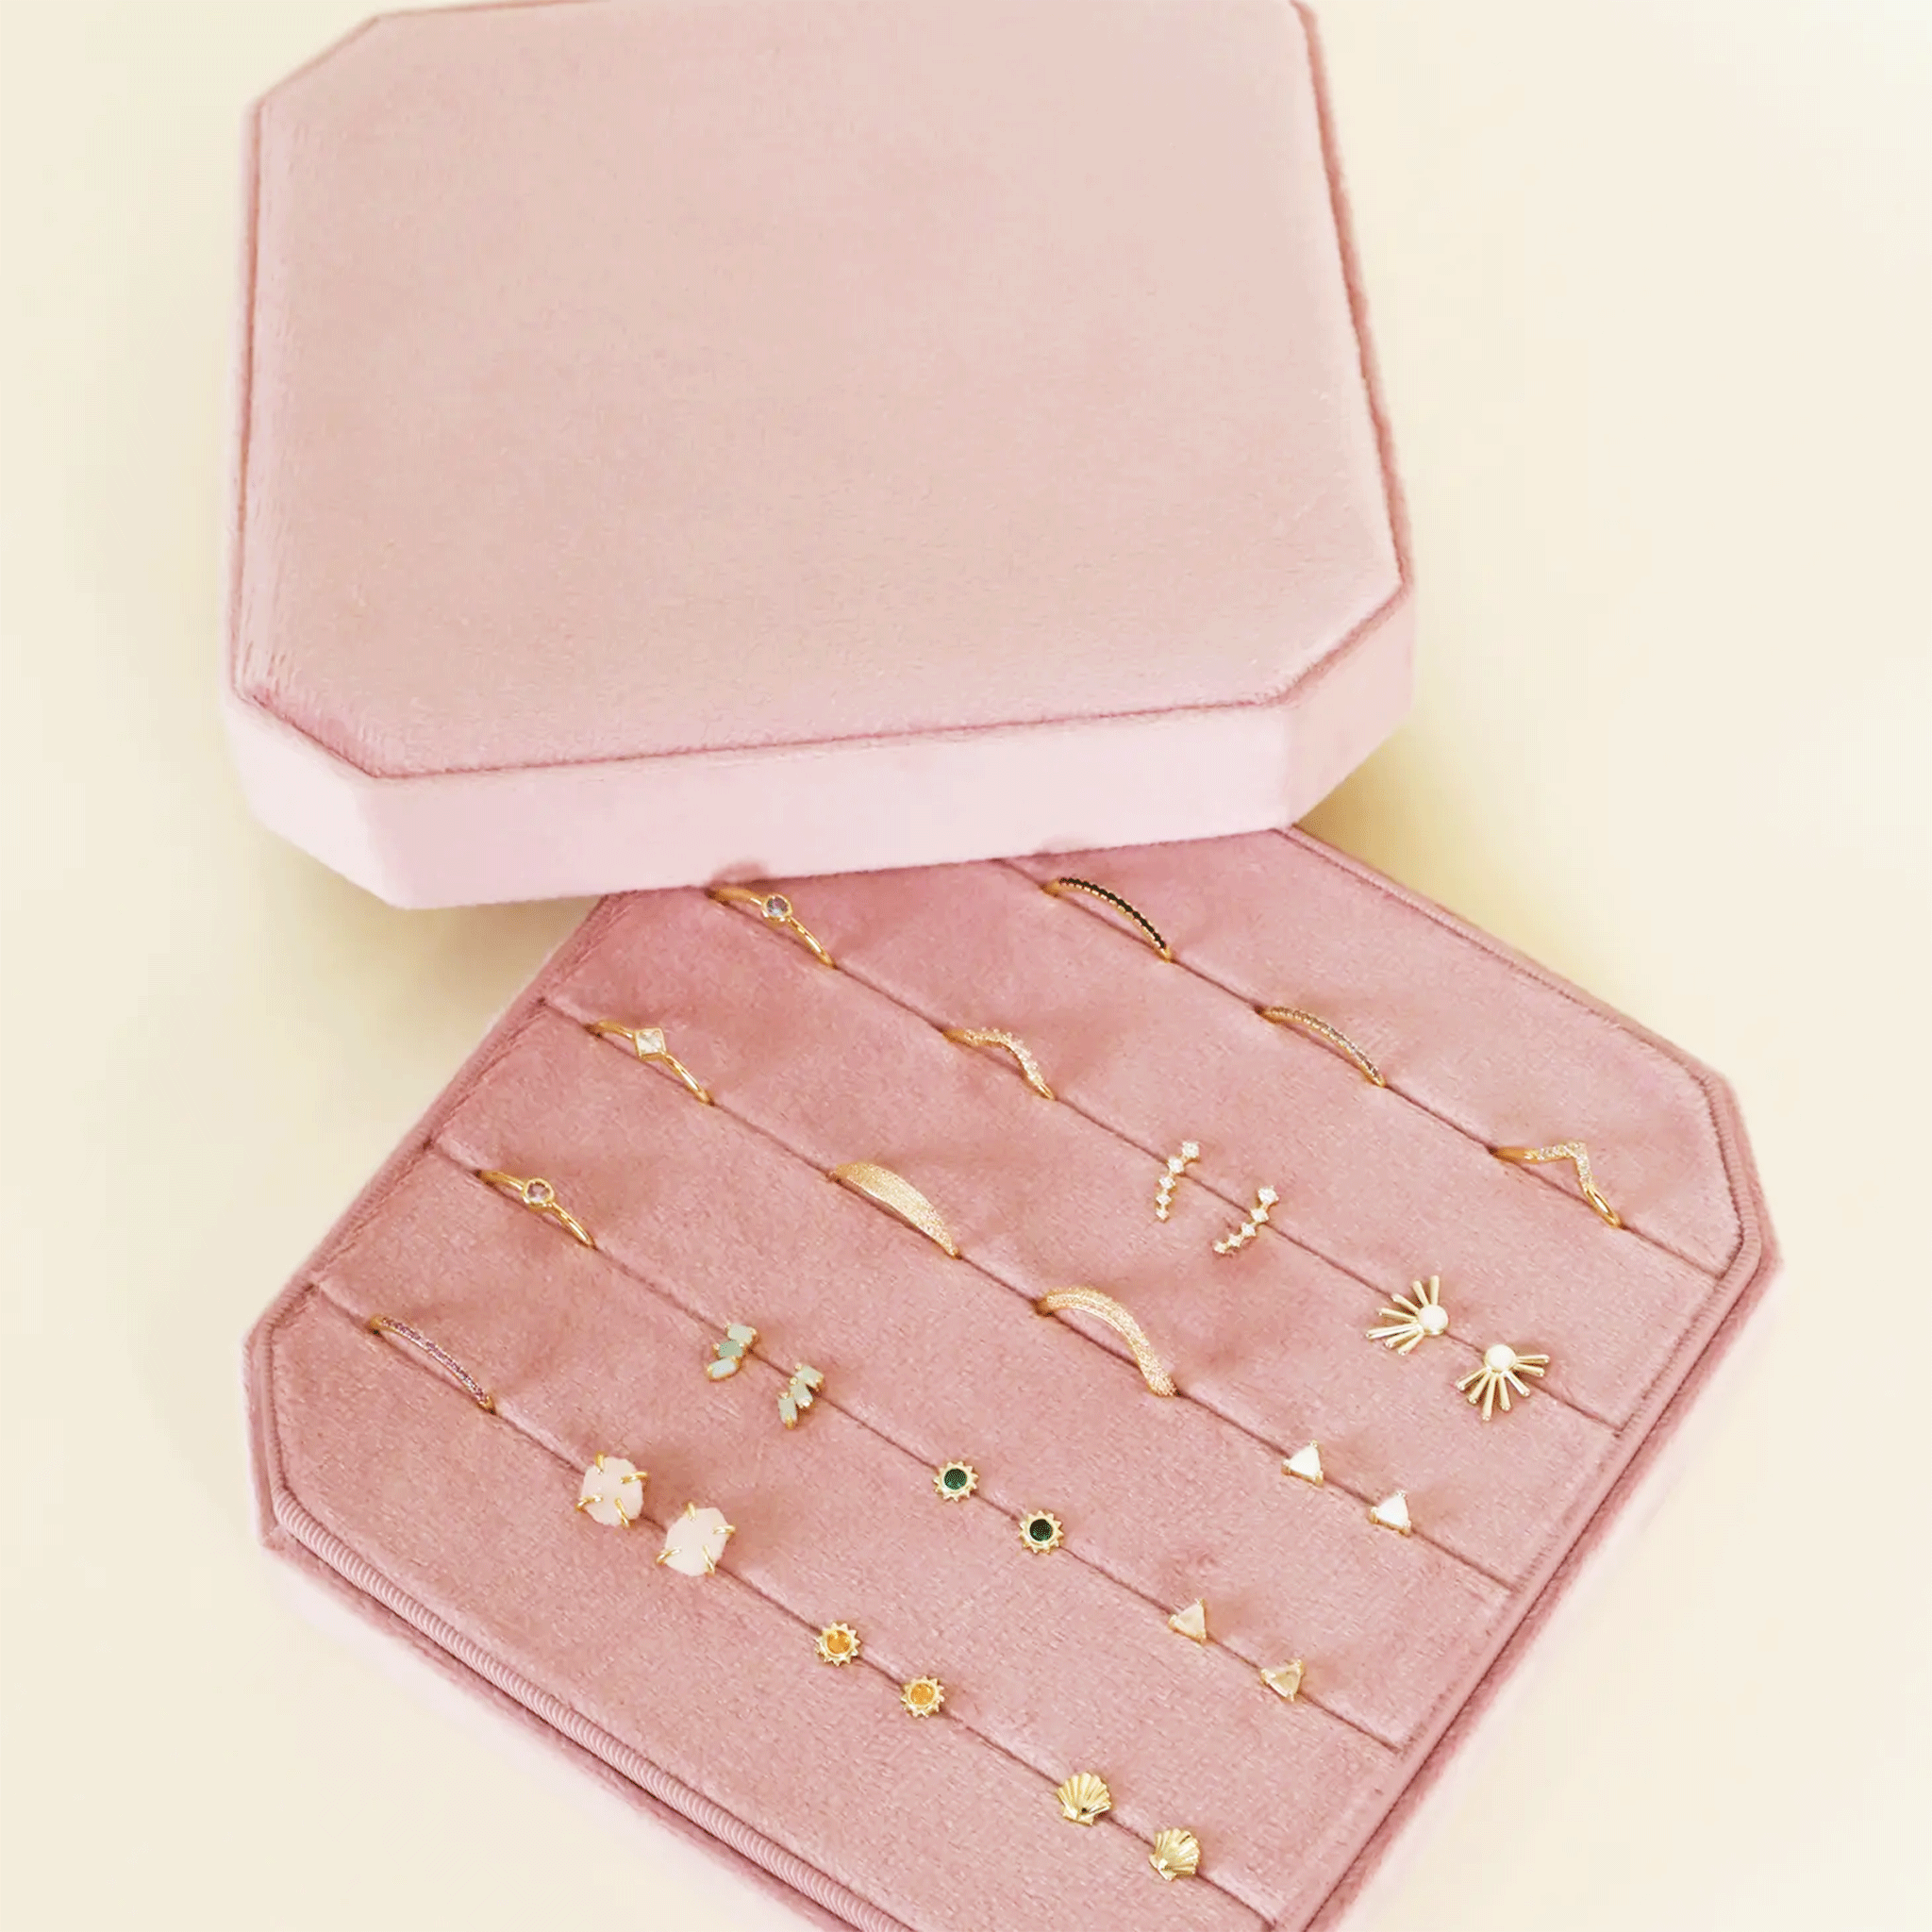 On a white background is a light pink velvet jewelry box filled with earrings and rings that are not included with purchase. 